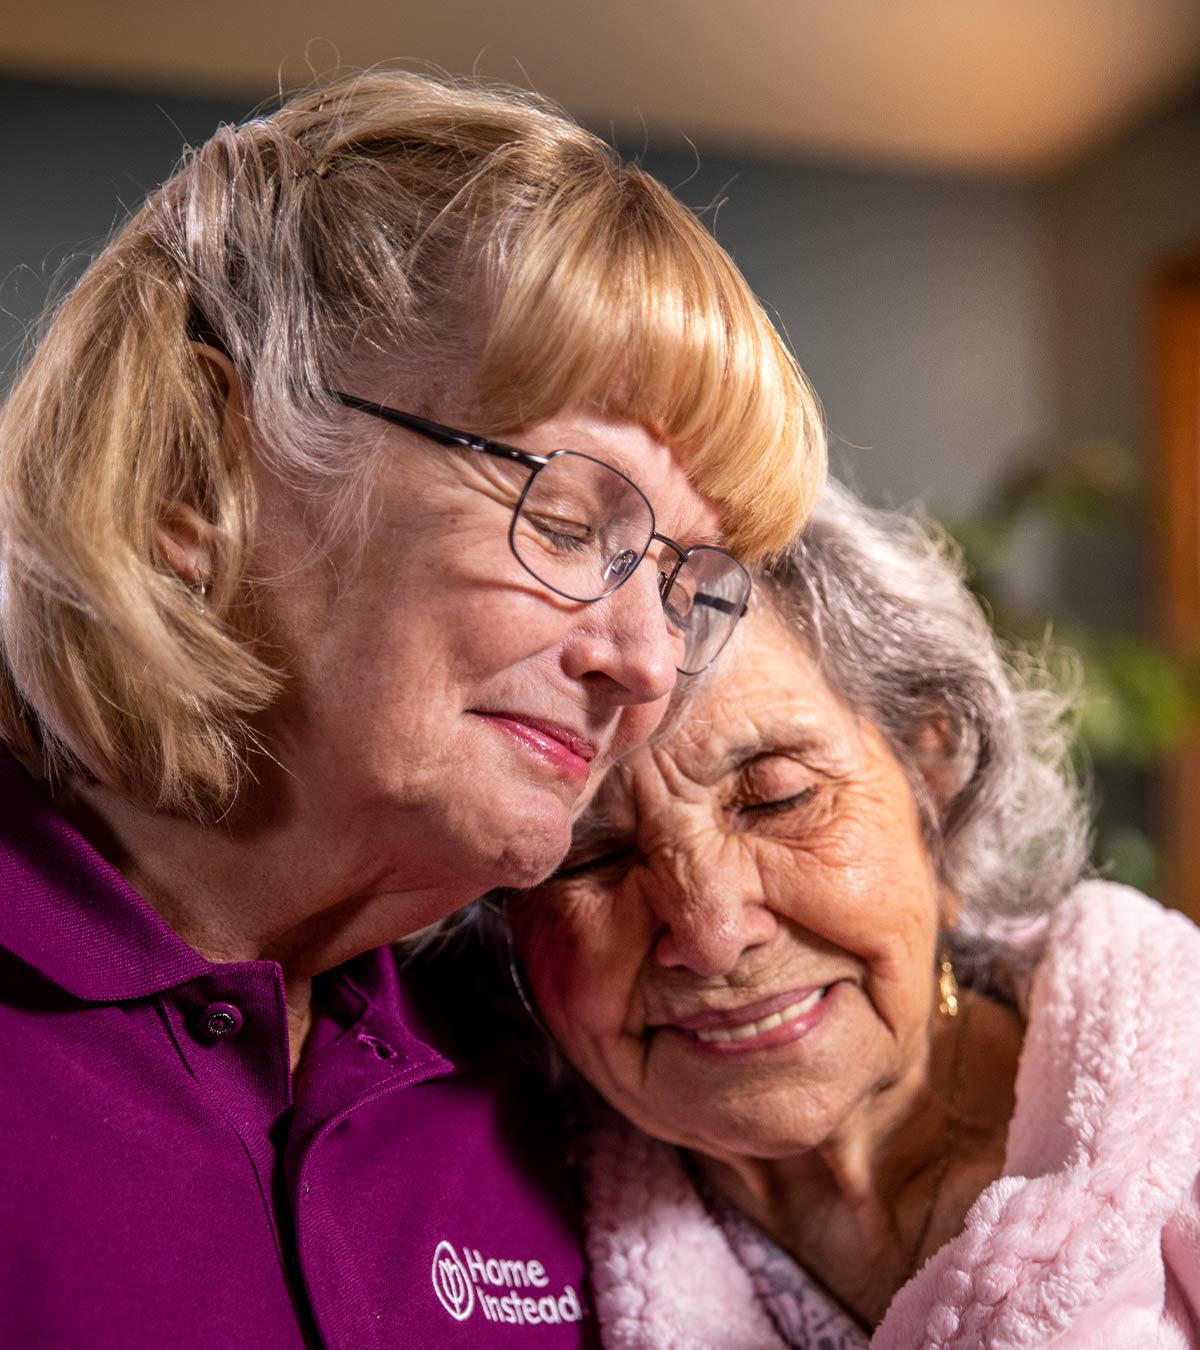 CAREGiver providing in-home senior care services. Home Instead of Morgantown, WV provides Elder Care to aging adults. 